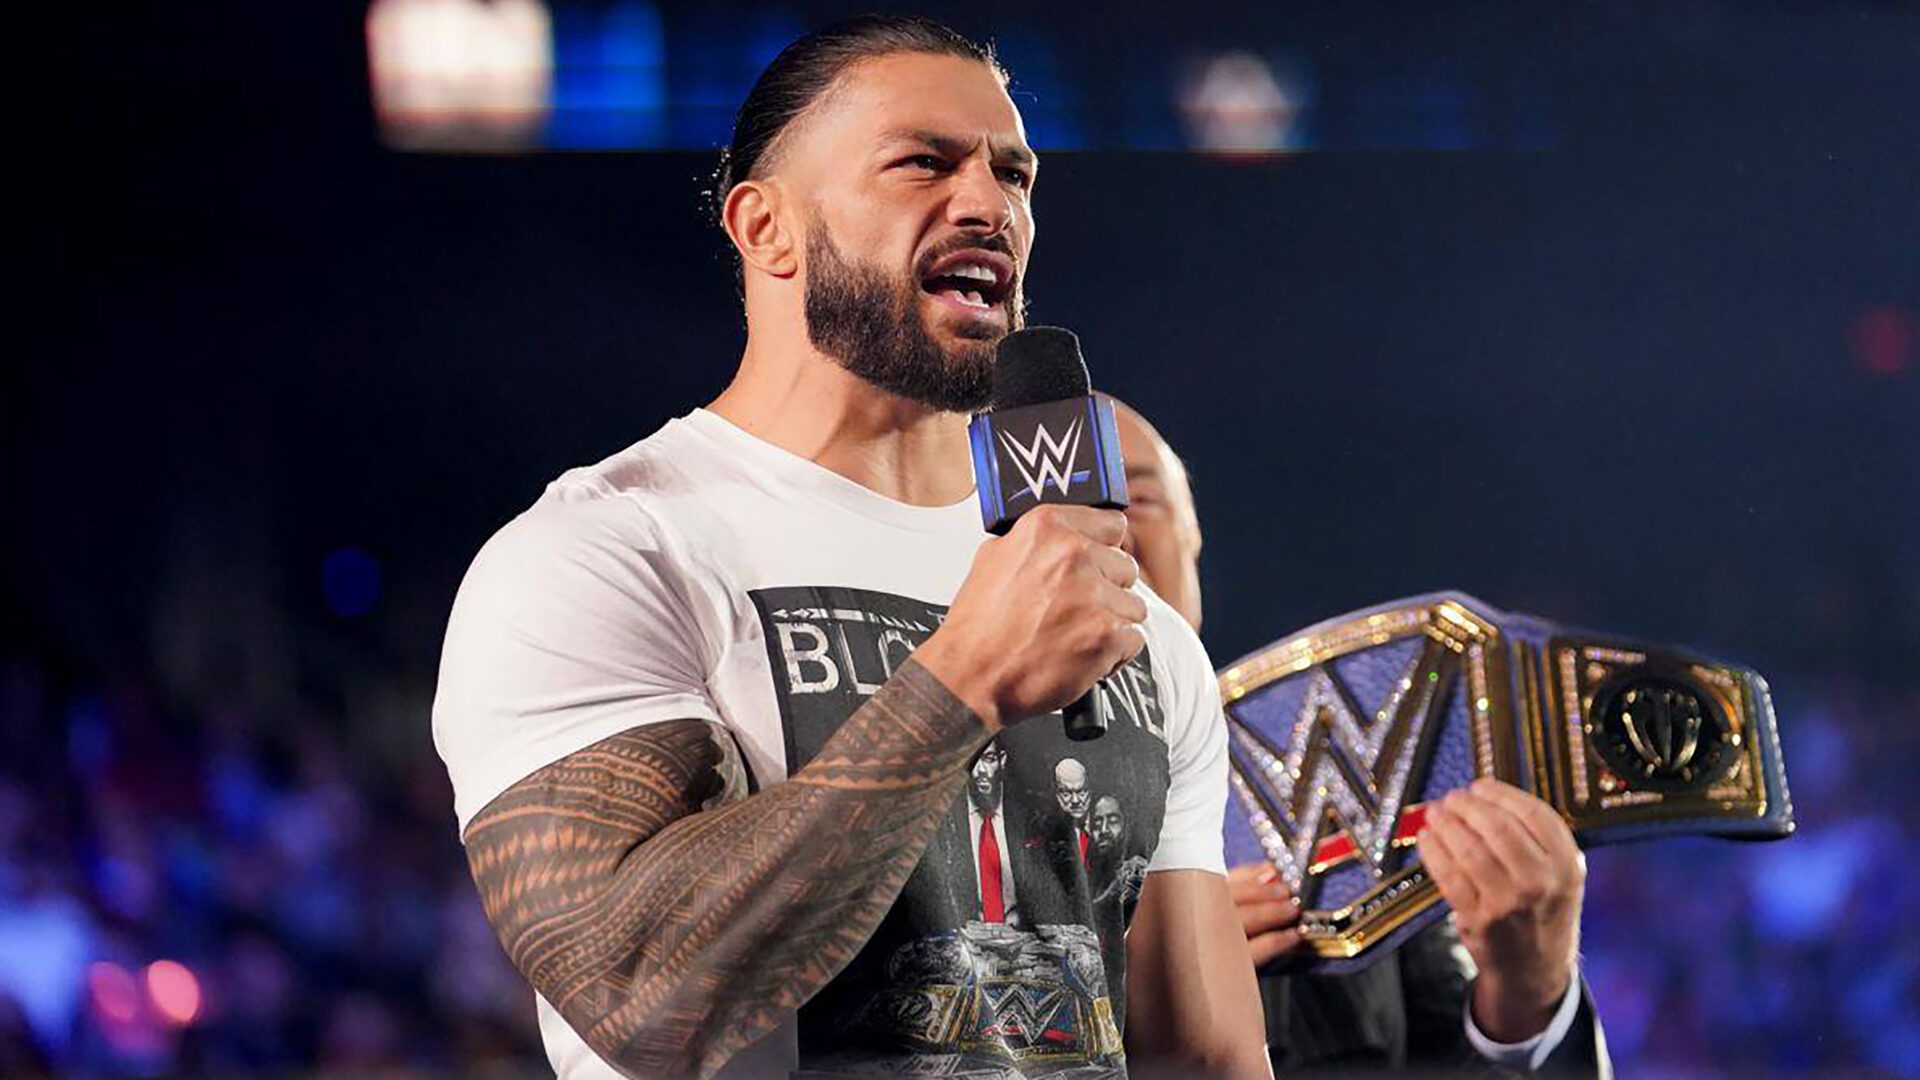 Will Roman Reigns Leaving WWE For Hollywood?